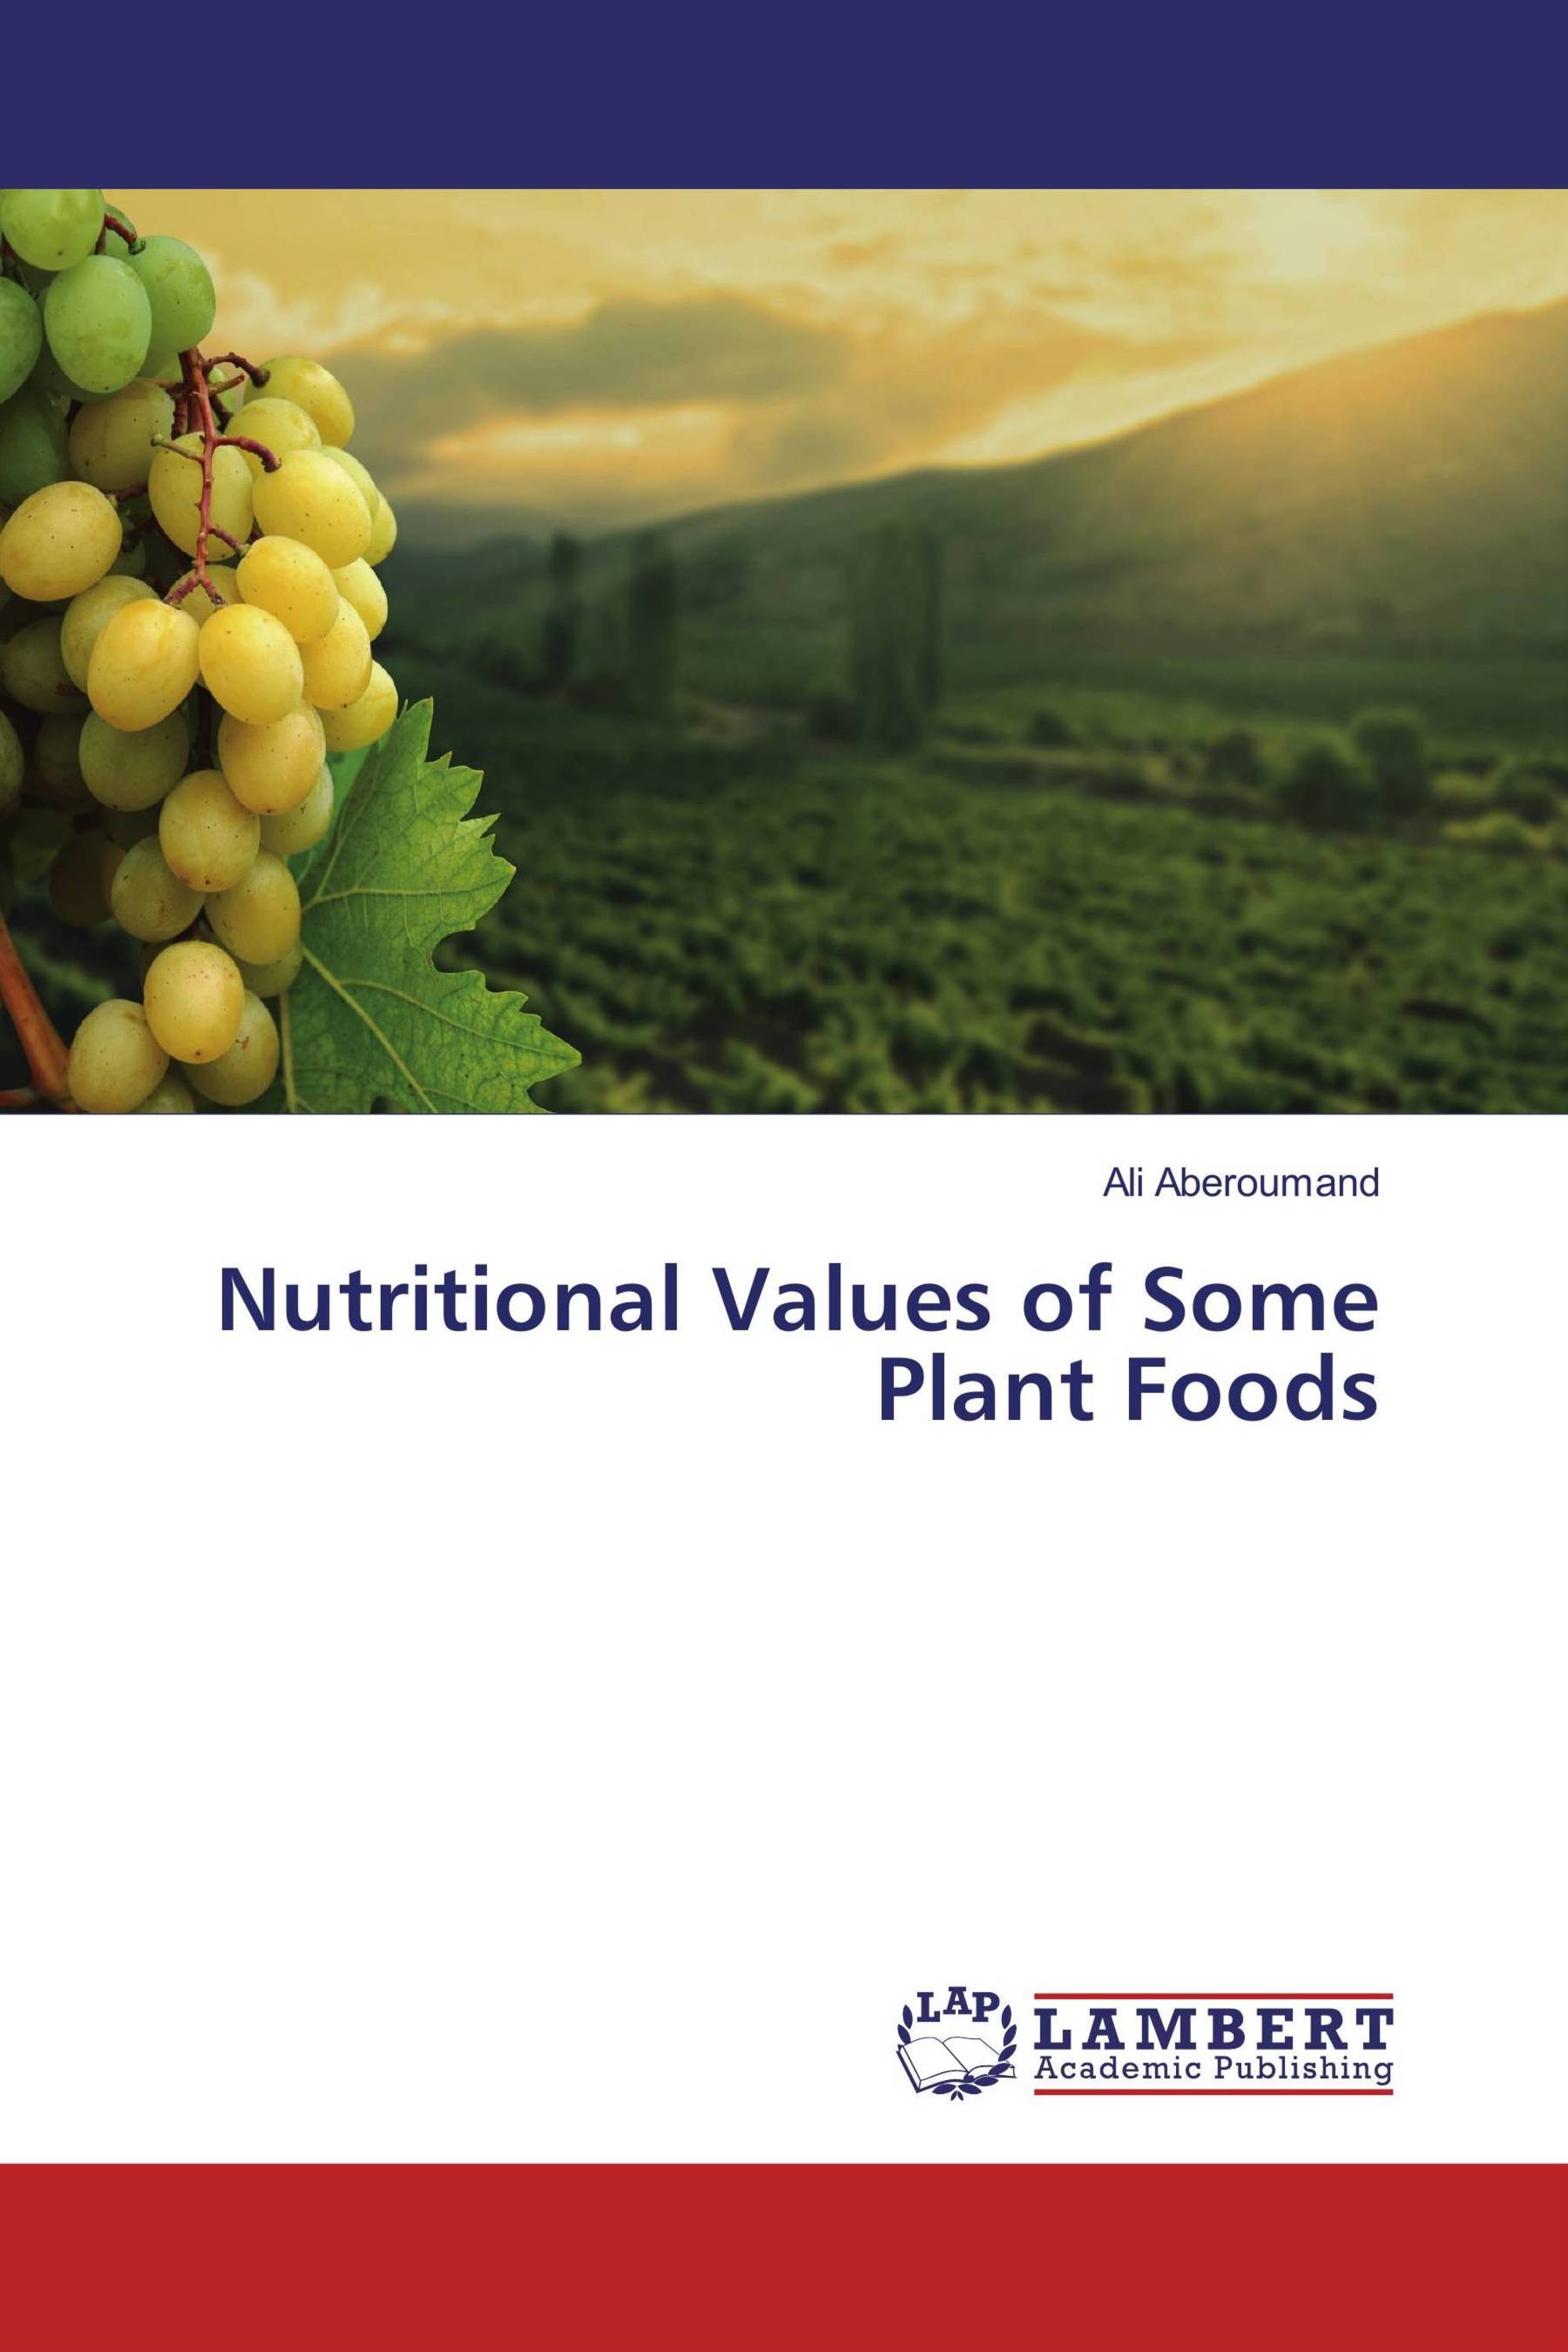 plant and food research values